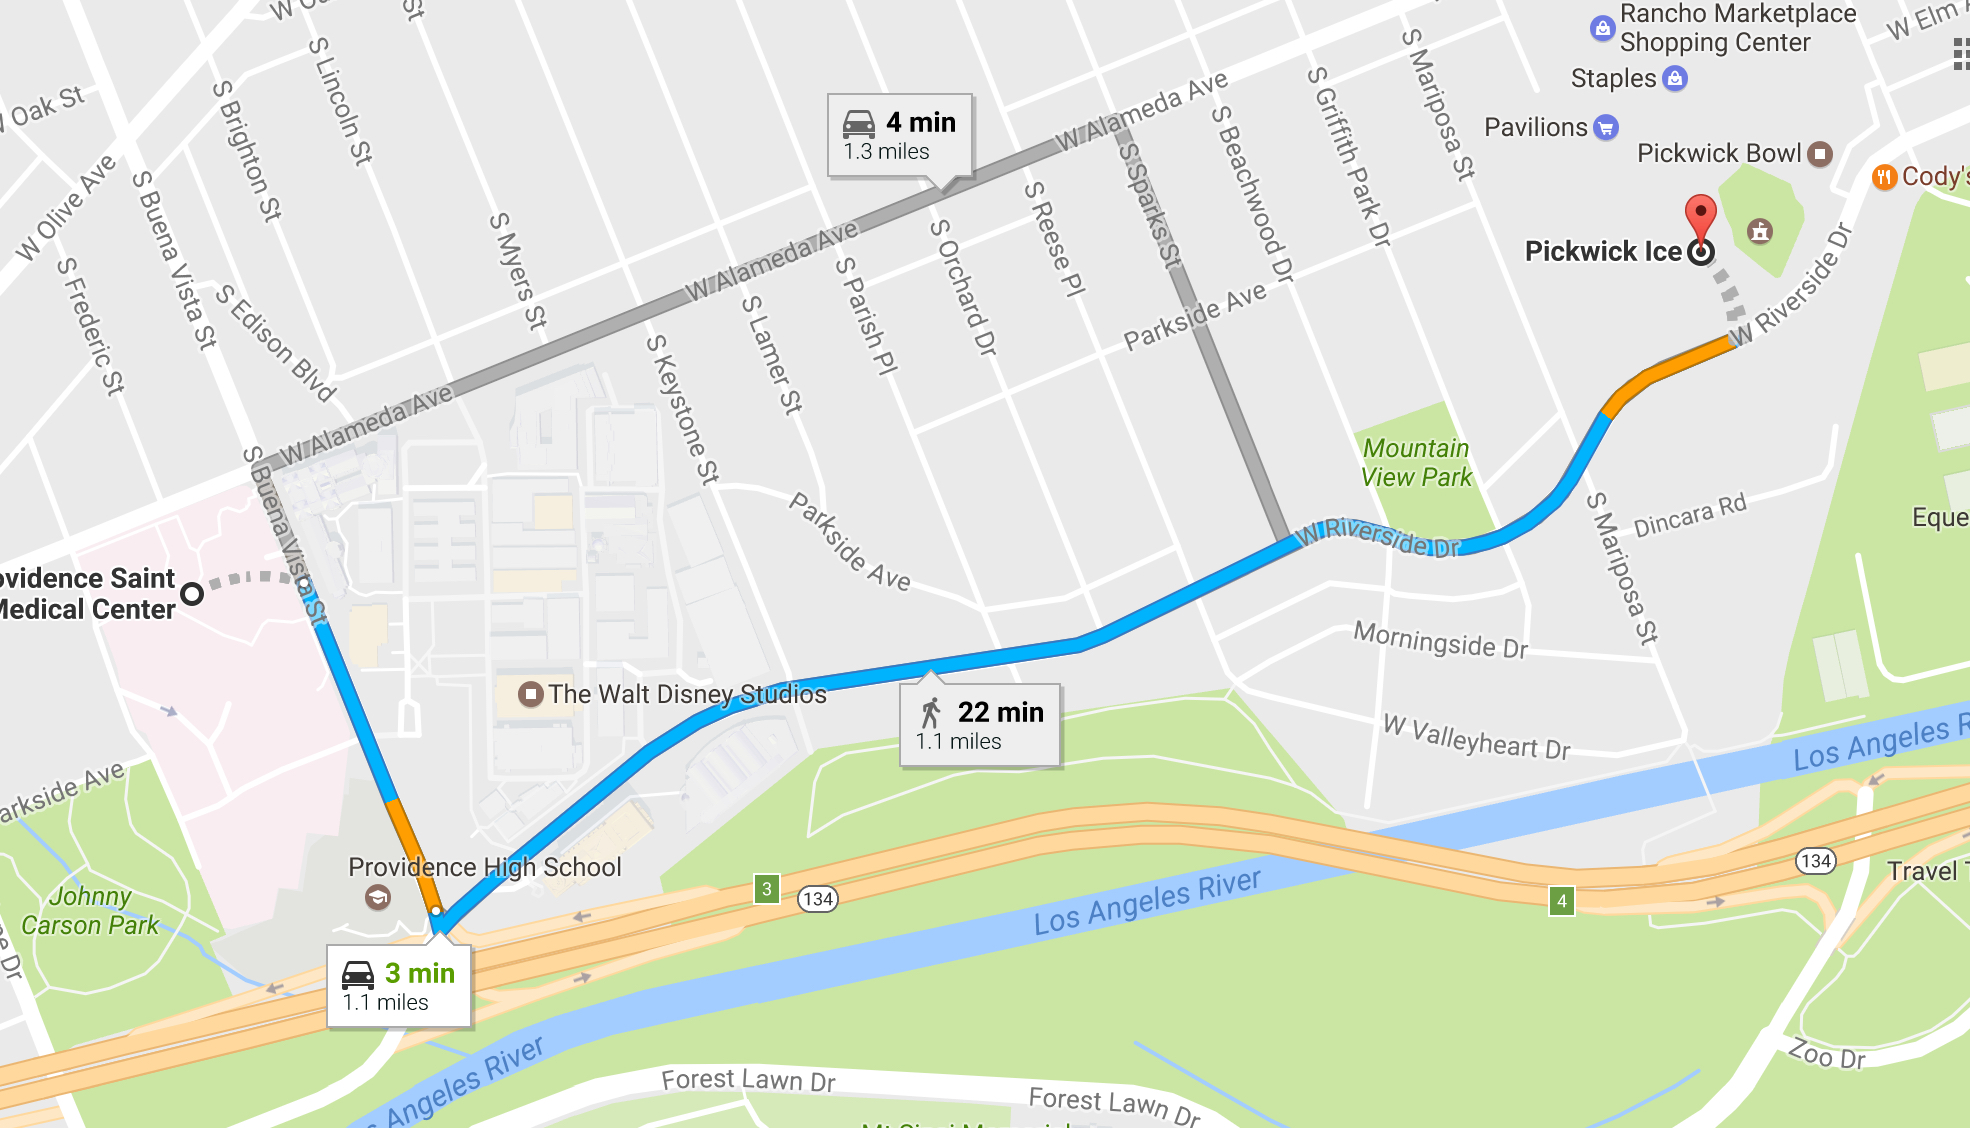 The distance between Picwick Ice and Providence Saint Joseph Medical Center is 1.1 miles